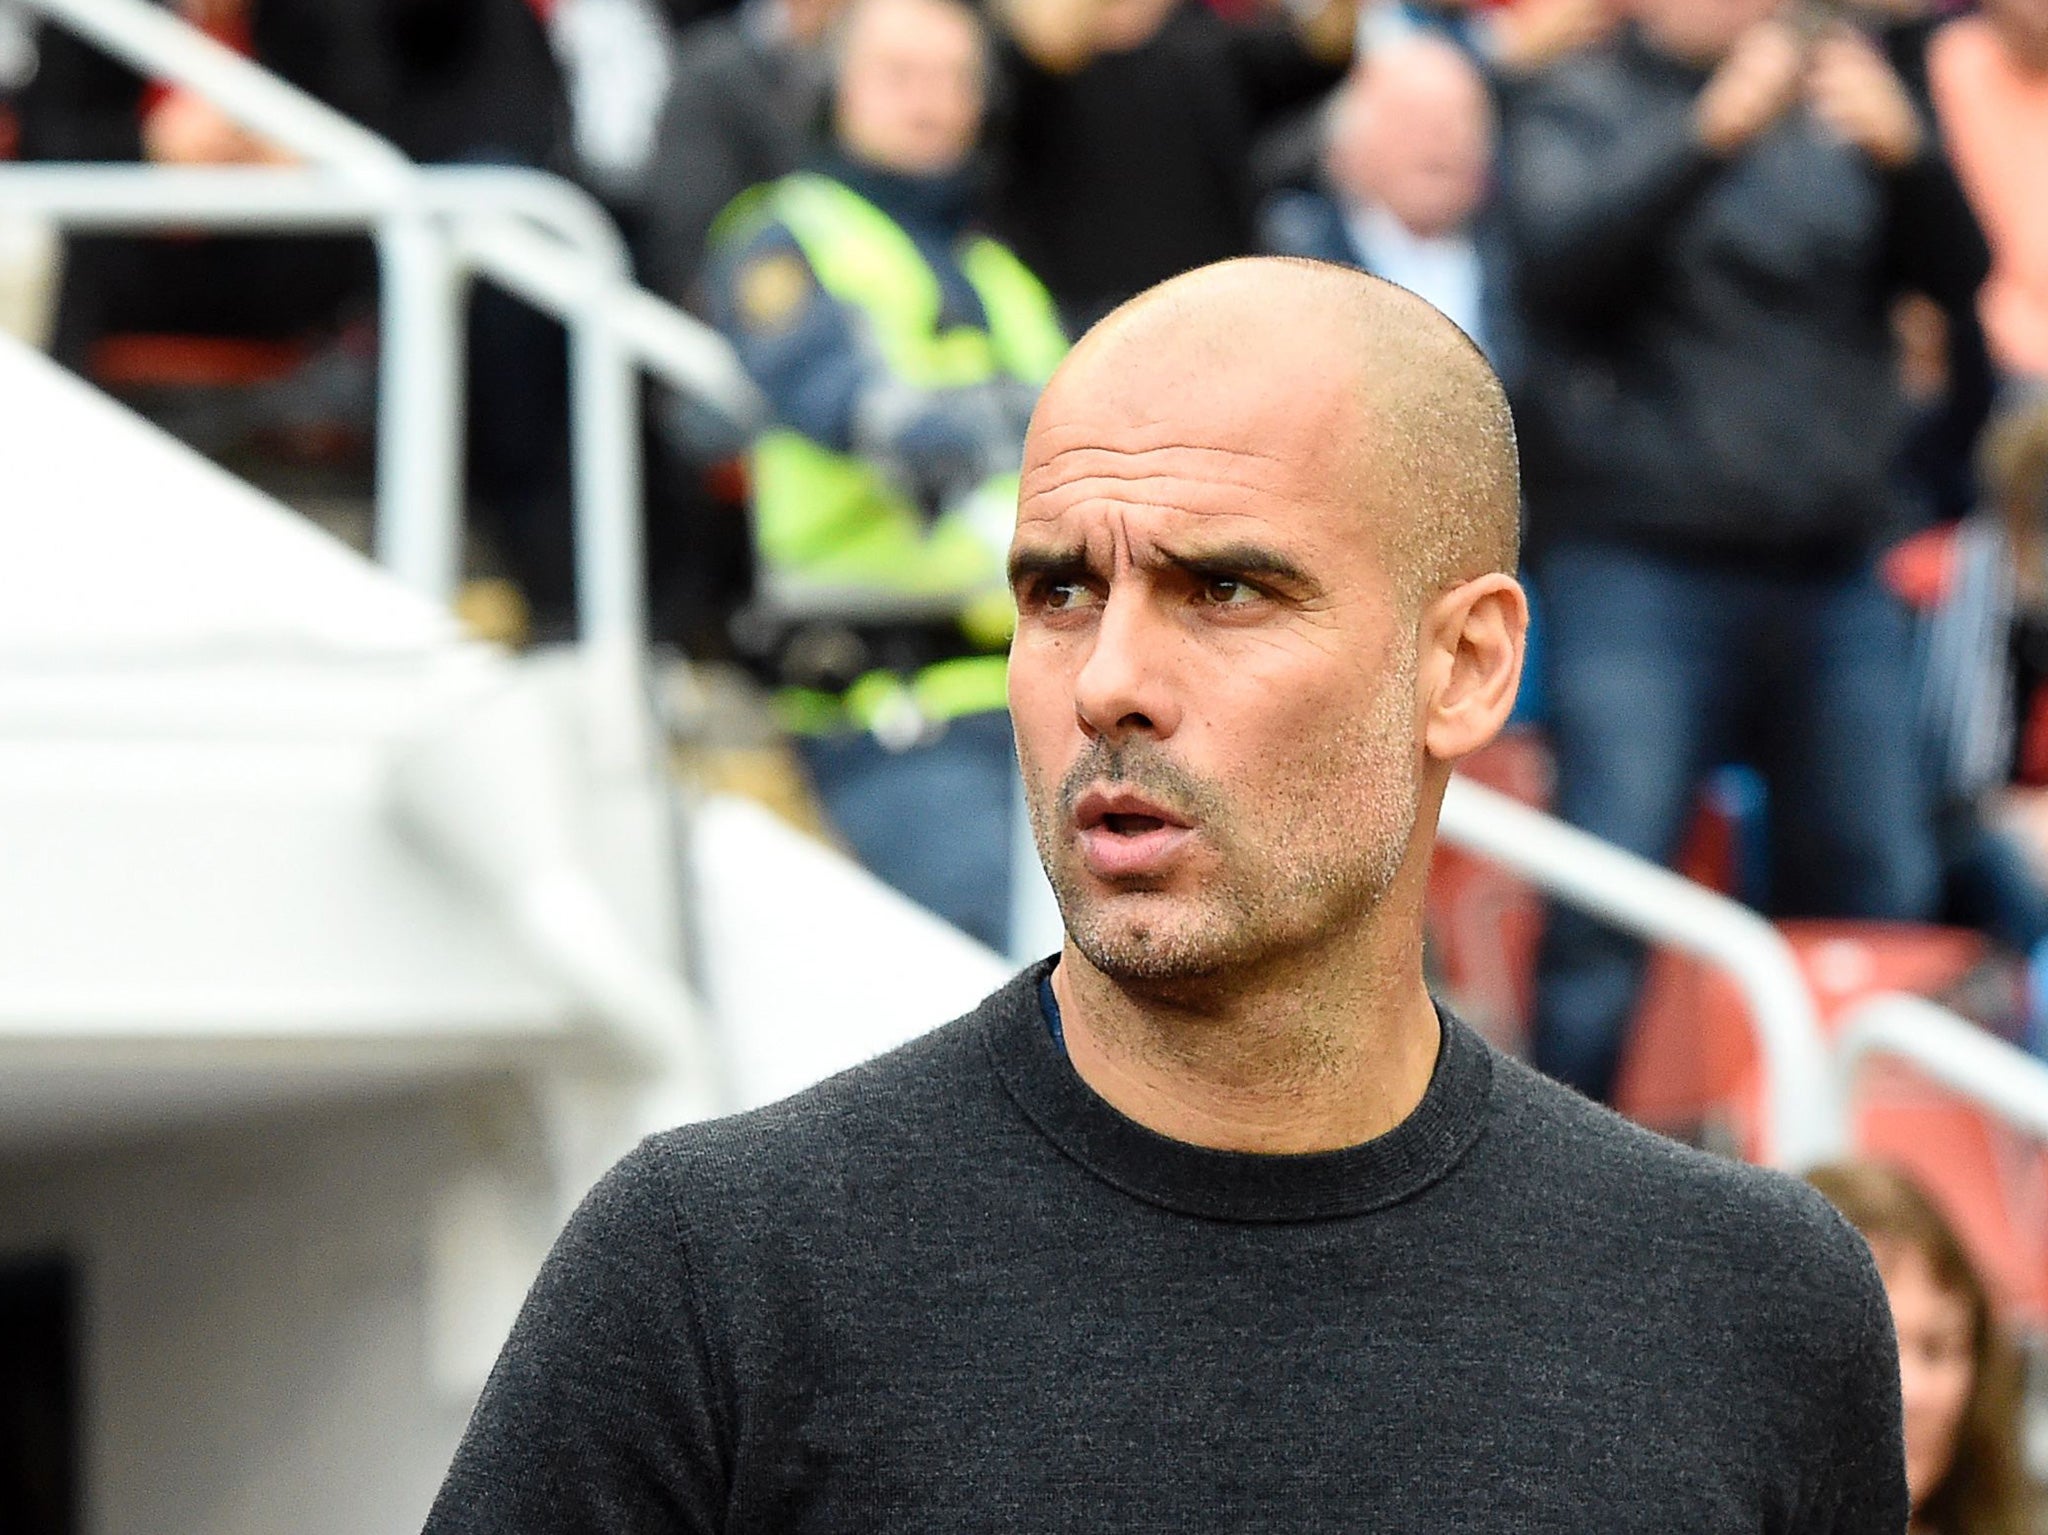 Pep Guardiola will come up against old foe Jose Mourinho in cross-town rivalry this season